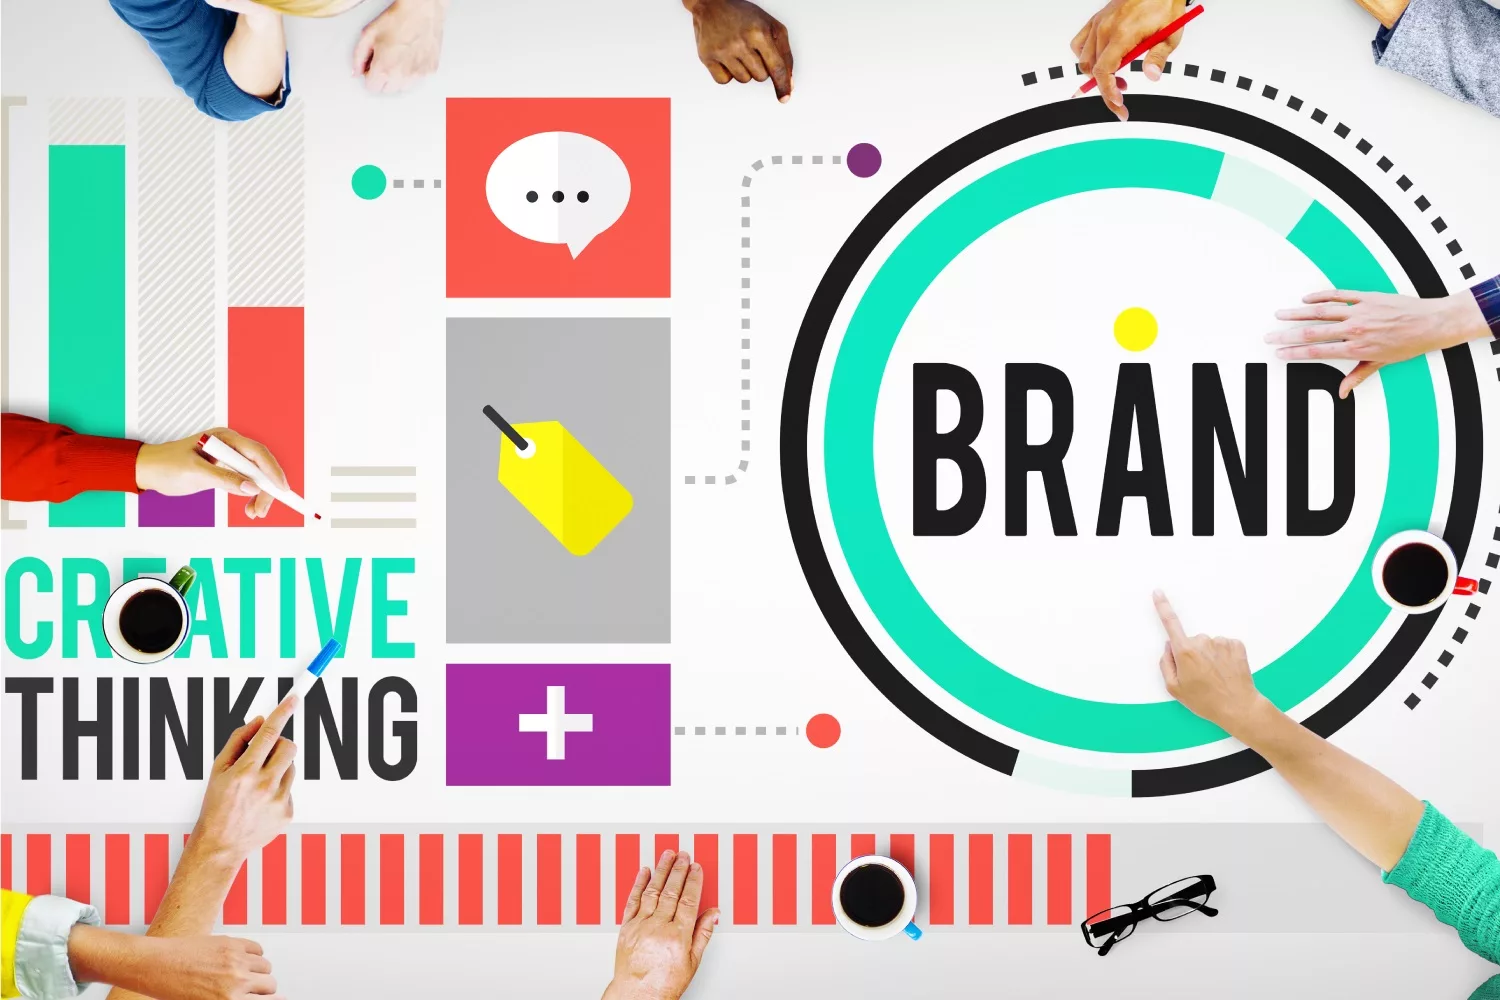 Taglines and Slogans in Brand Marketing